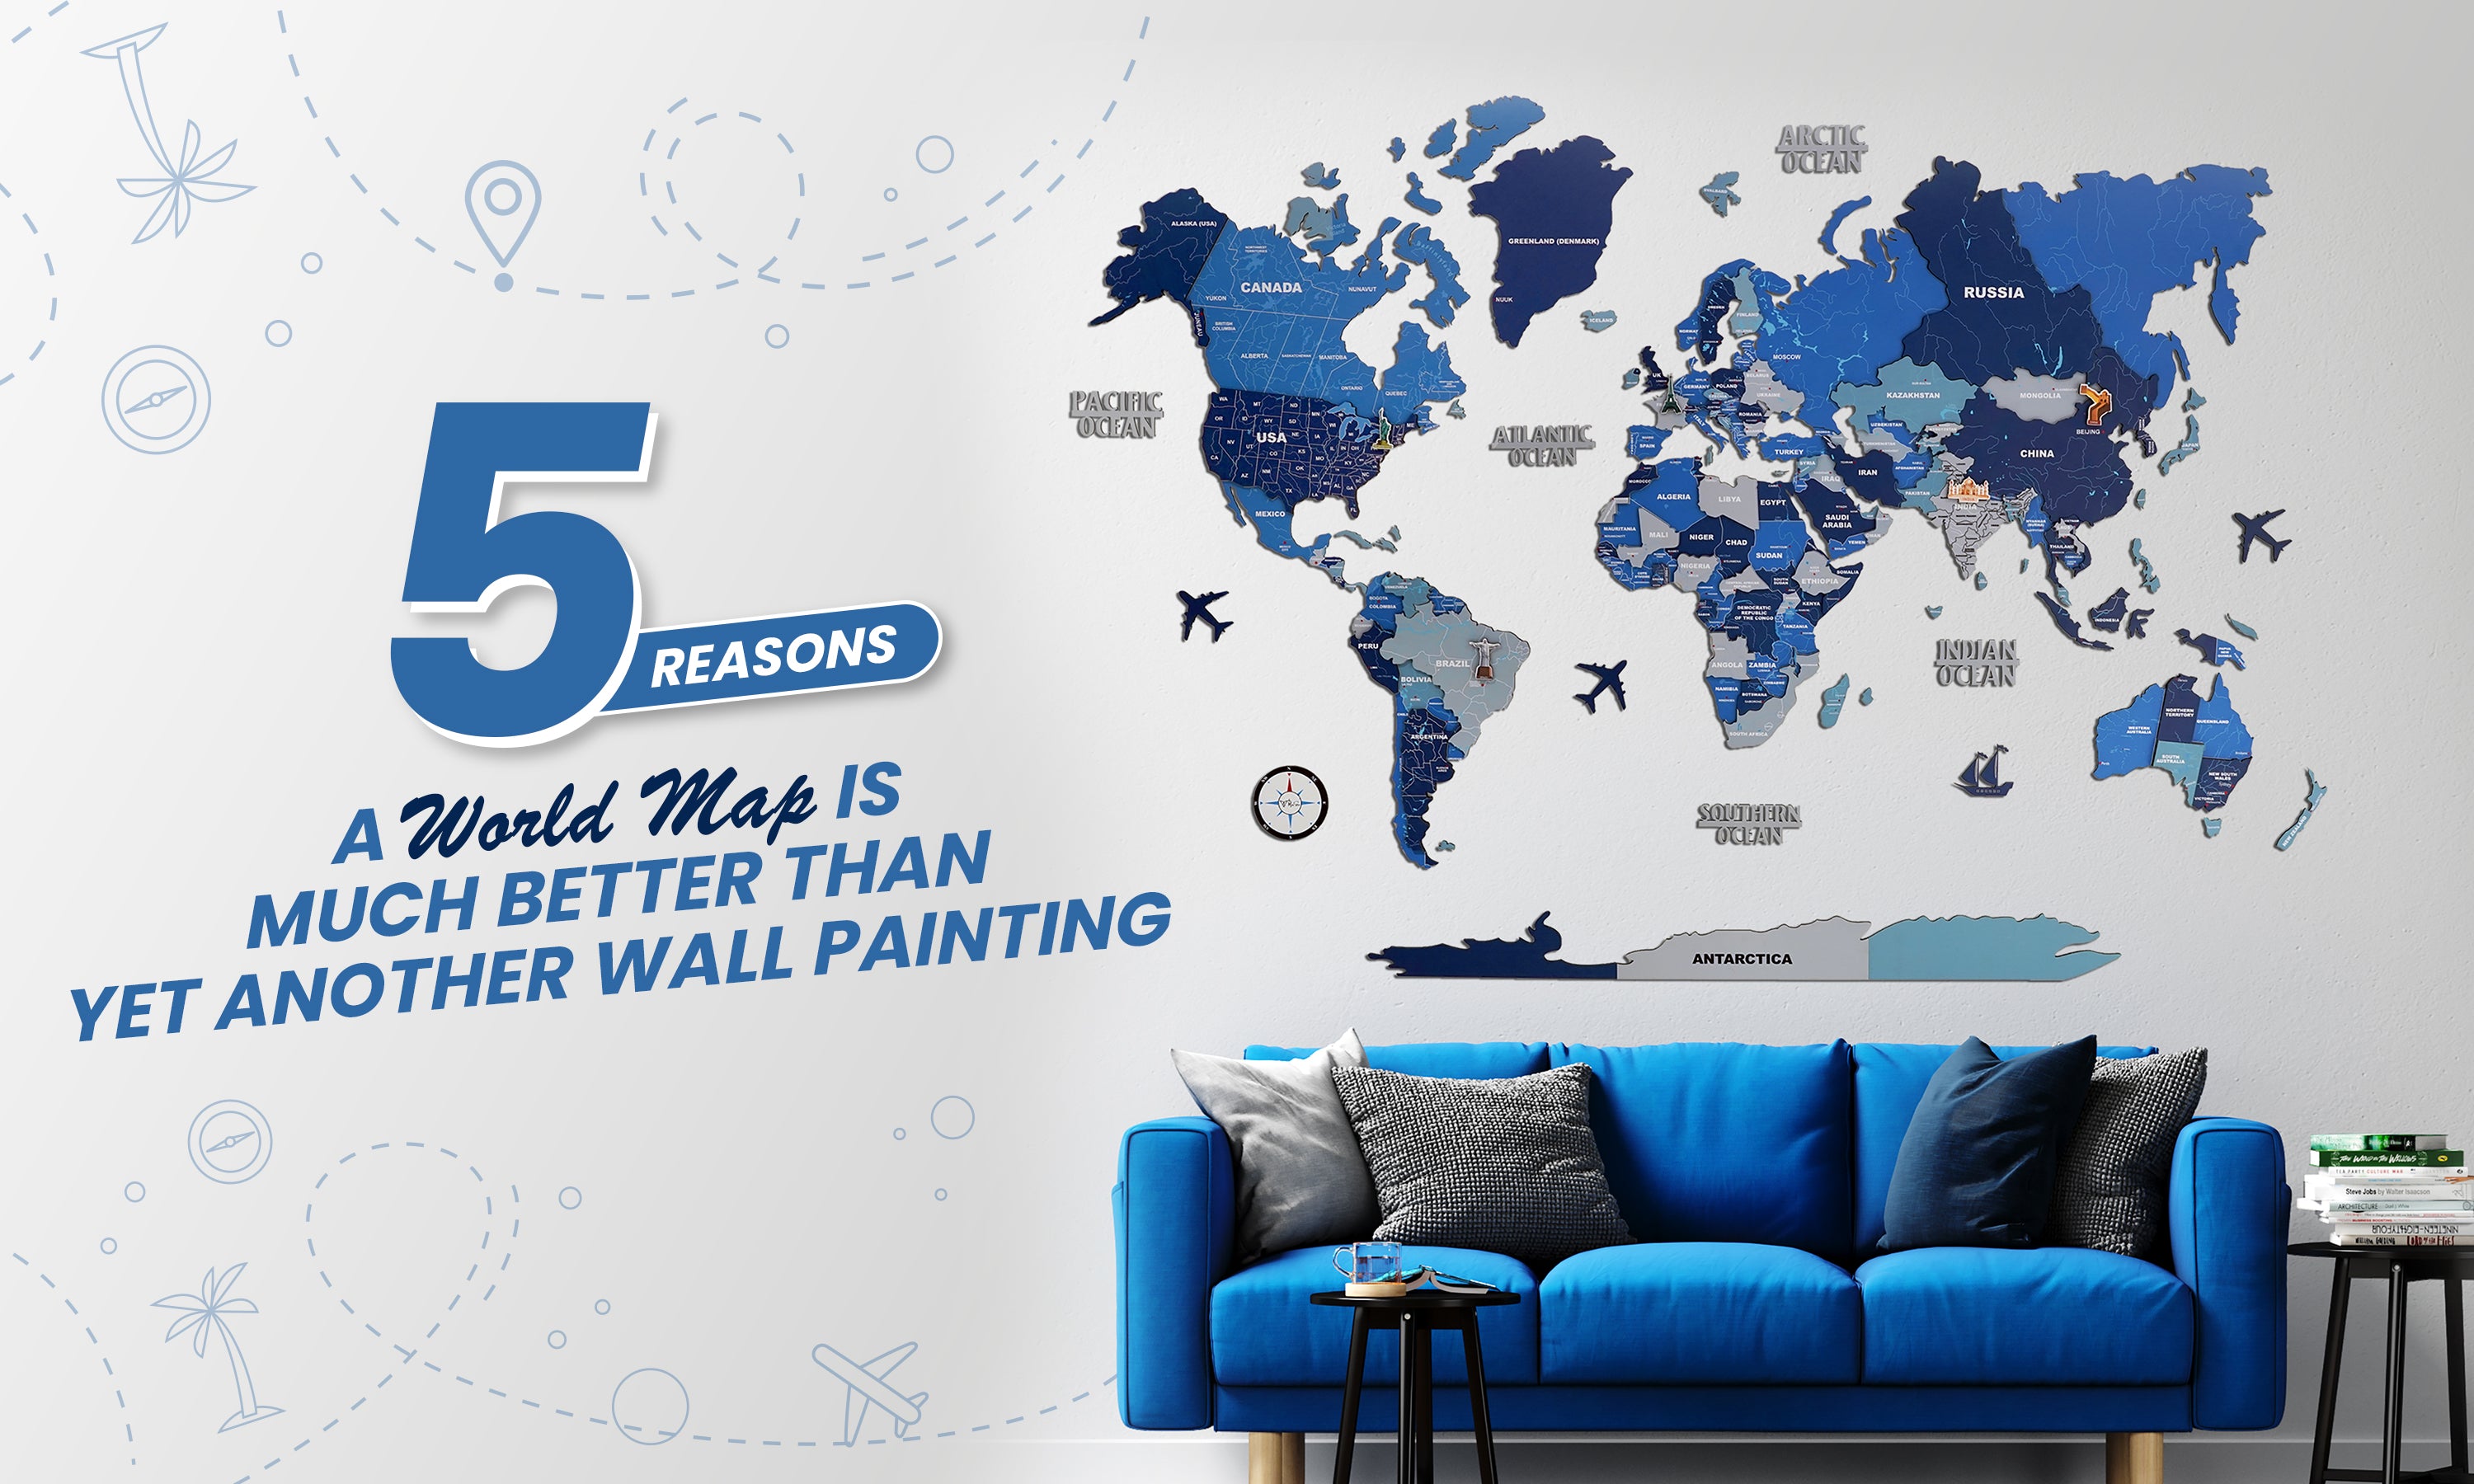 Five Reasons A World Map Is Much Better Than Yet Another Wall Painting